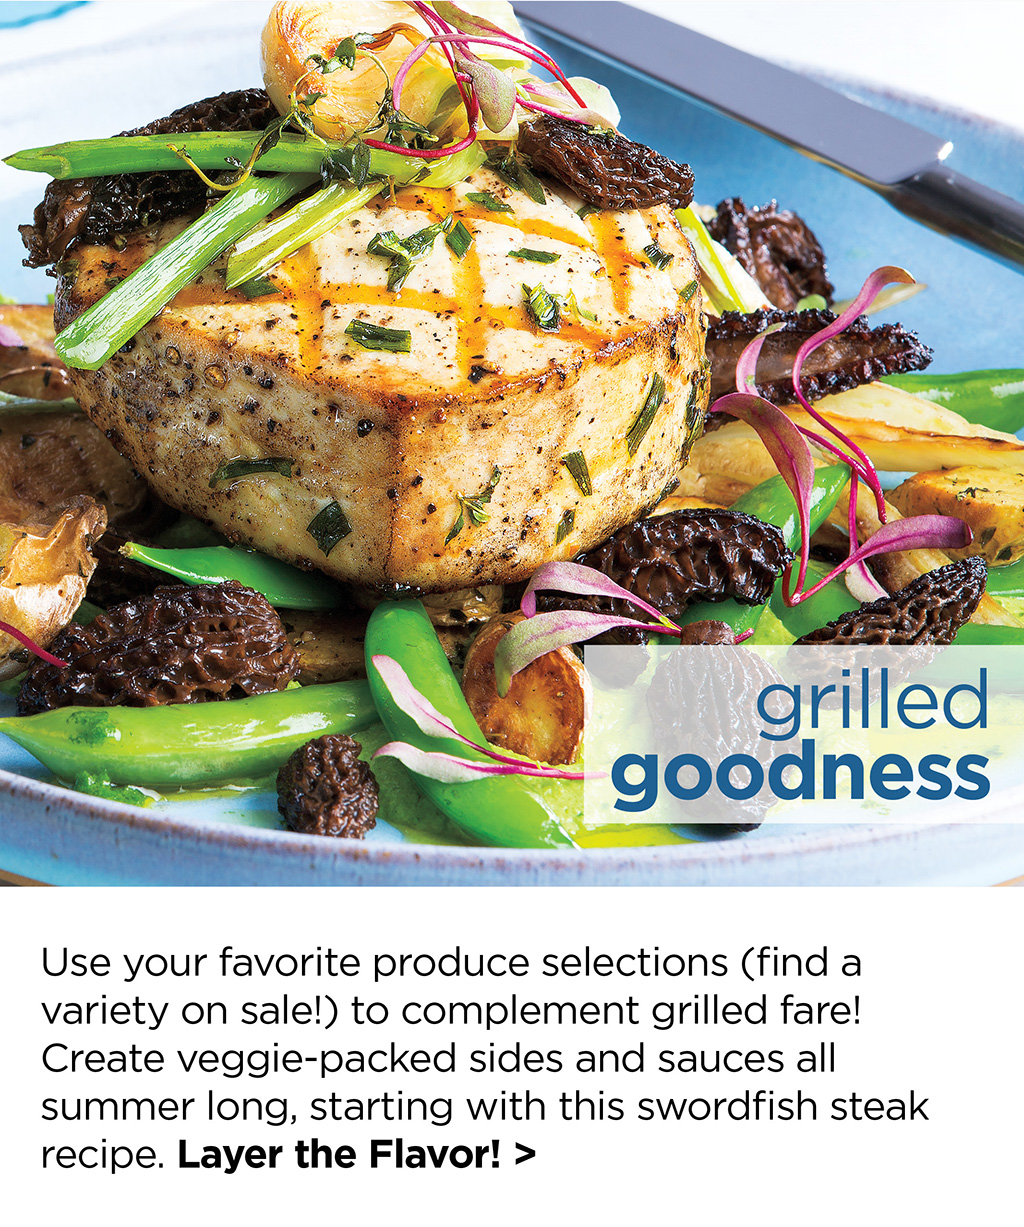 grilled goodness - Use your favorite produce selections (find a variety on sale!) to complement grilled fare! Create veggie-packed sides and sauces all summer long, starting with this swordfish steak recipe. Layer the Flavor! >